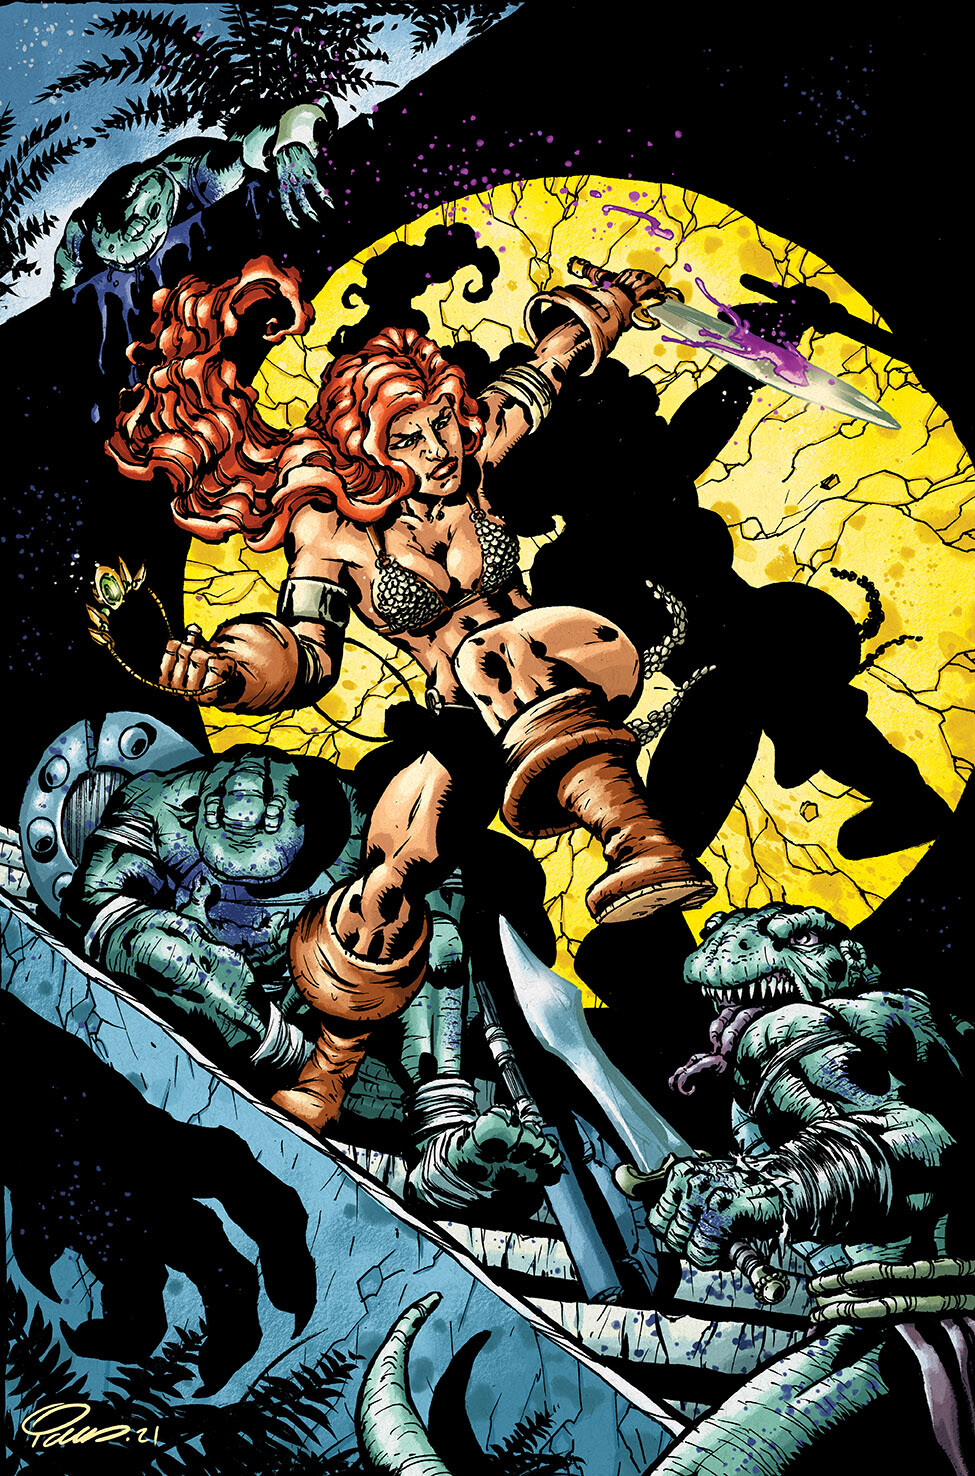 Finished color cover art for Red Sonja #1 without the trade dress.